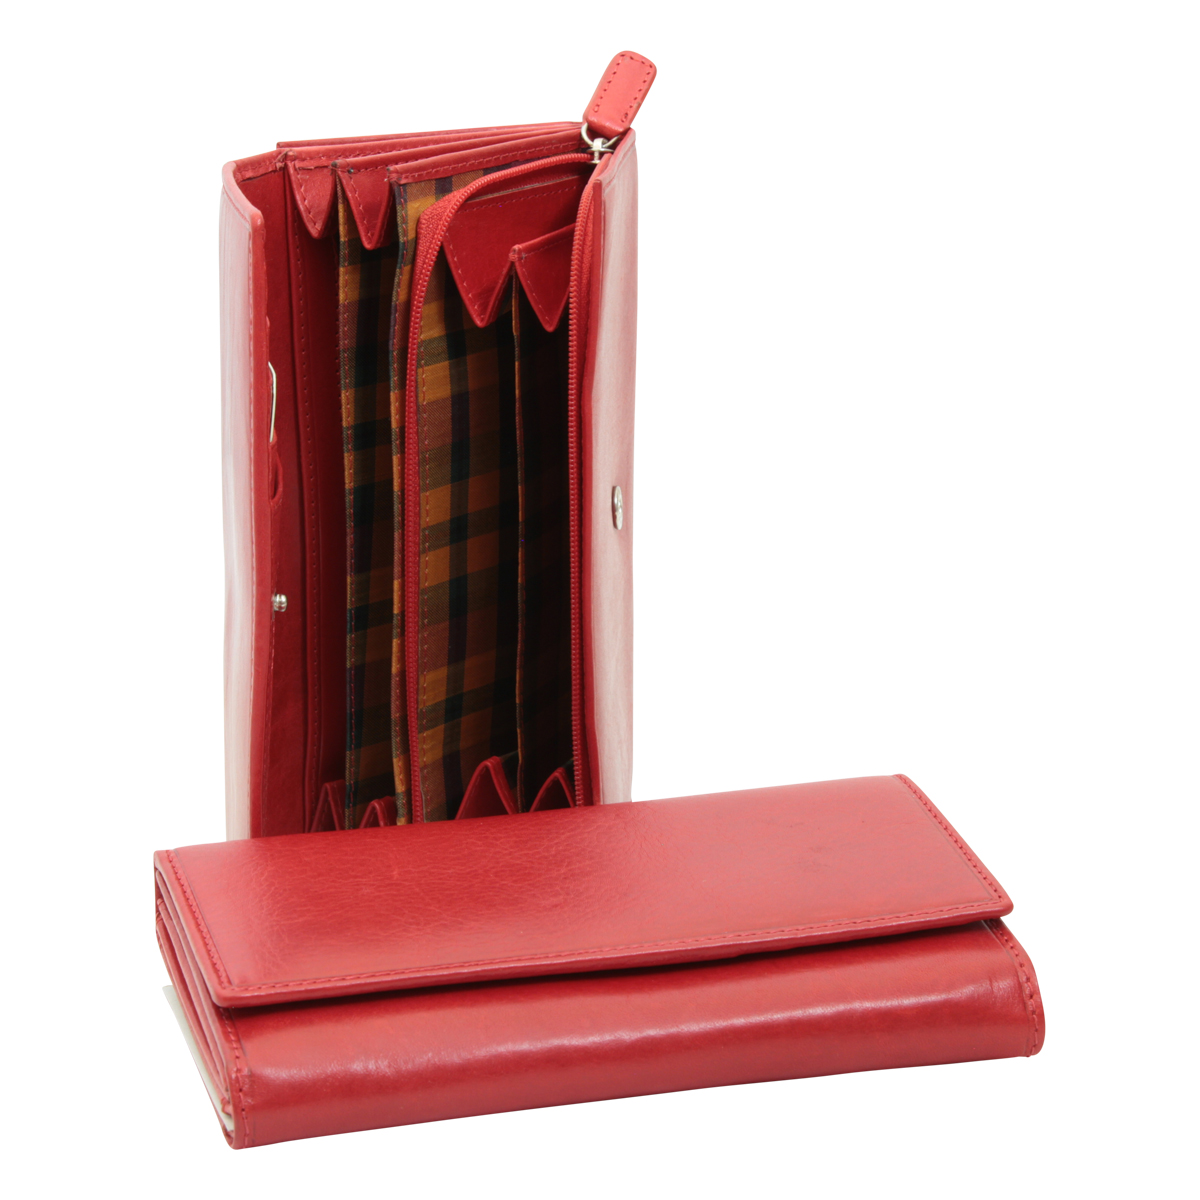 Women's leather wallet - red | 503289RO US | Old Angler Firenze